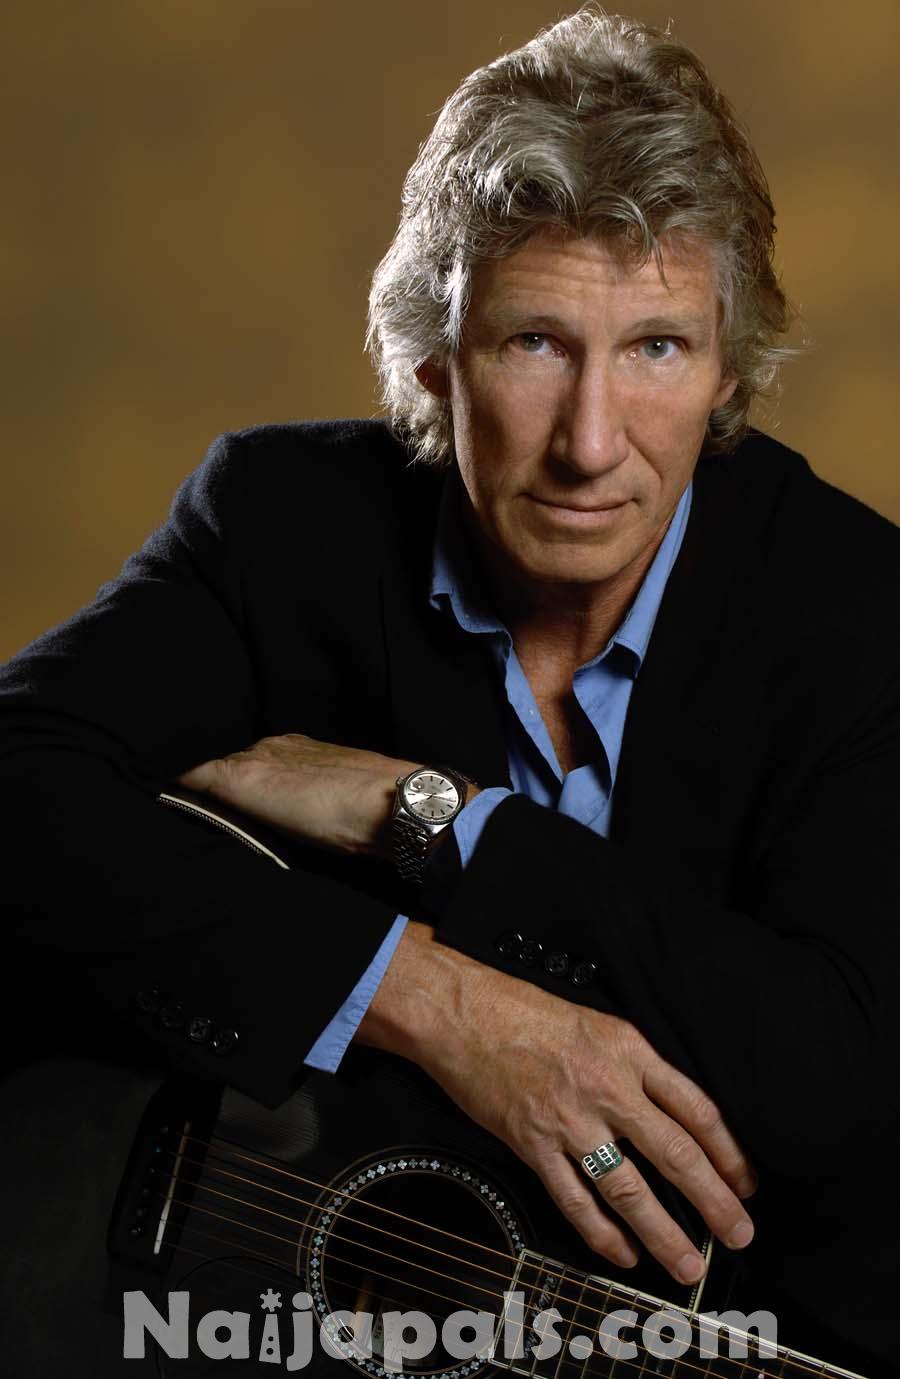 2. Roger Waters ($88 million)